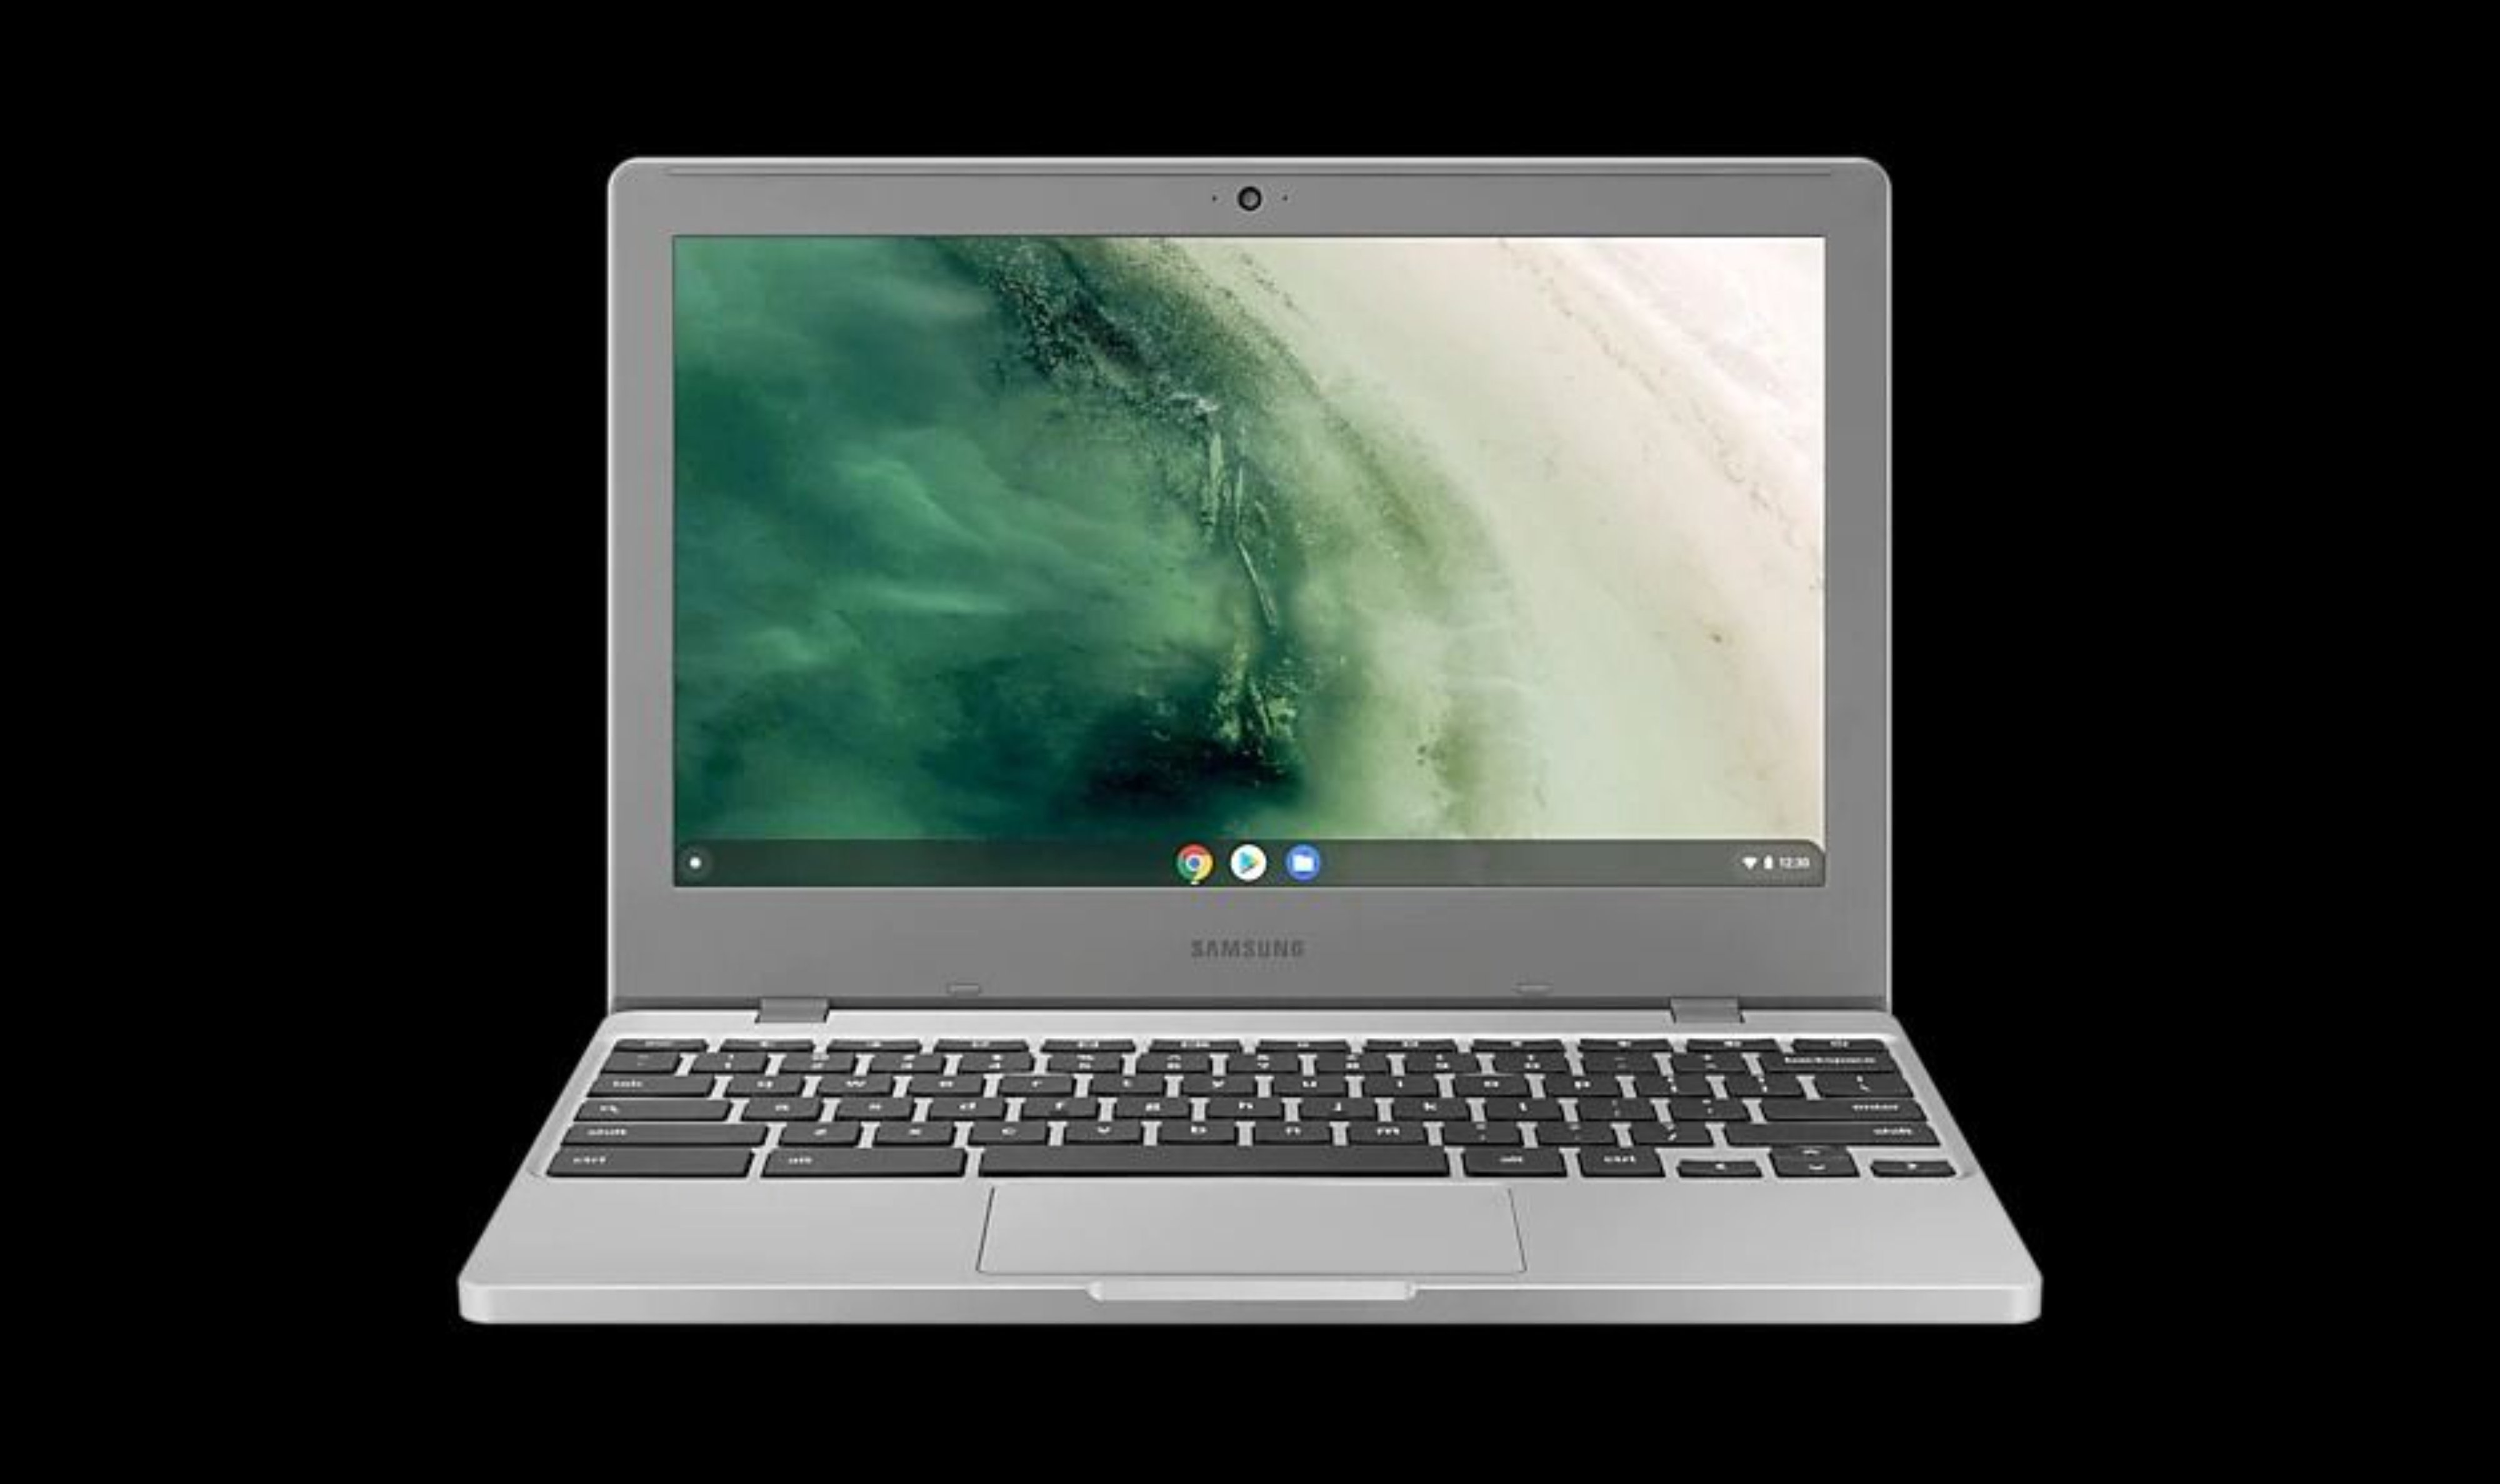 Samsung Chromebook 4/4+ debut in the UK after a year from the US launch